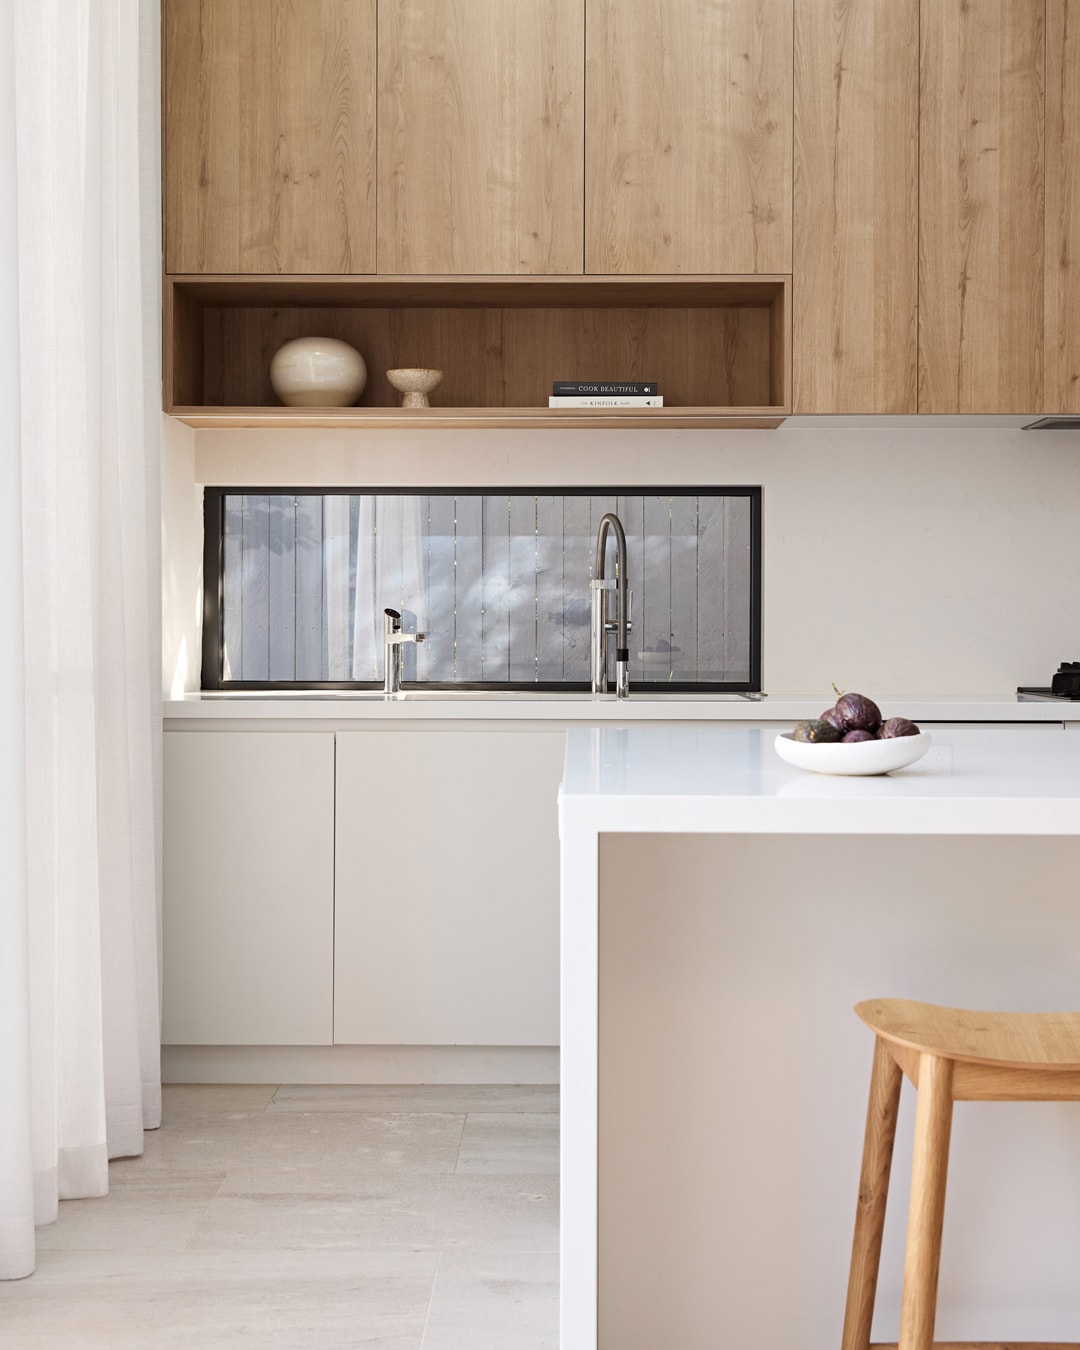 Vaucluse Project Kitchen - RMS Natural Stone and Ceramics